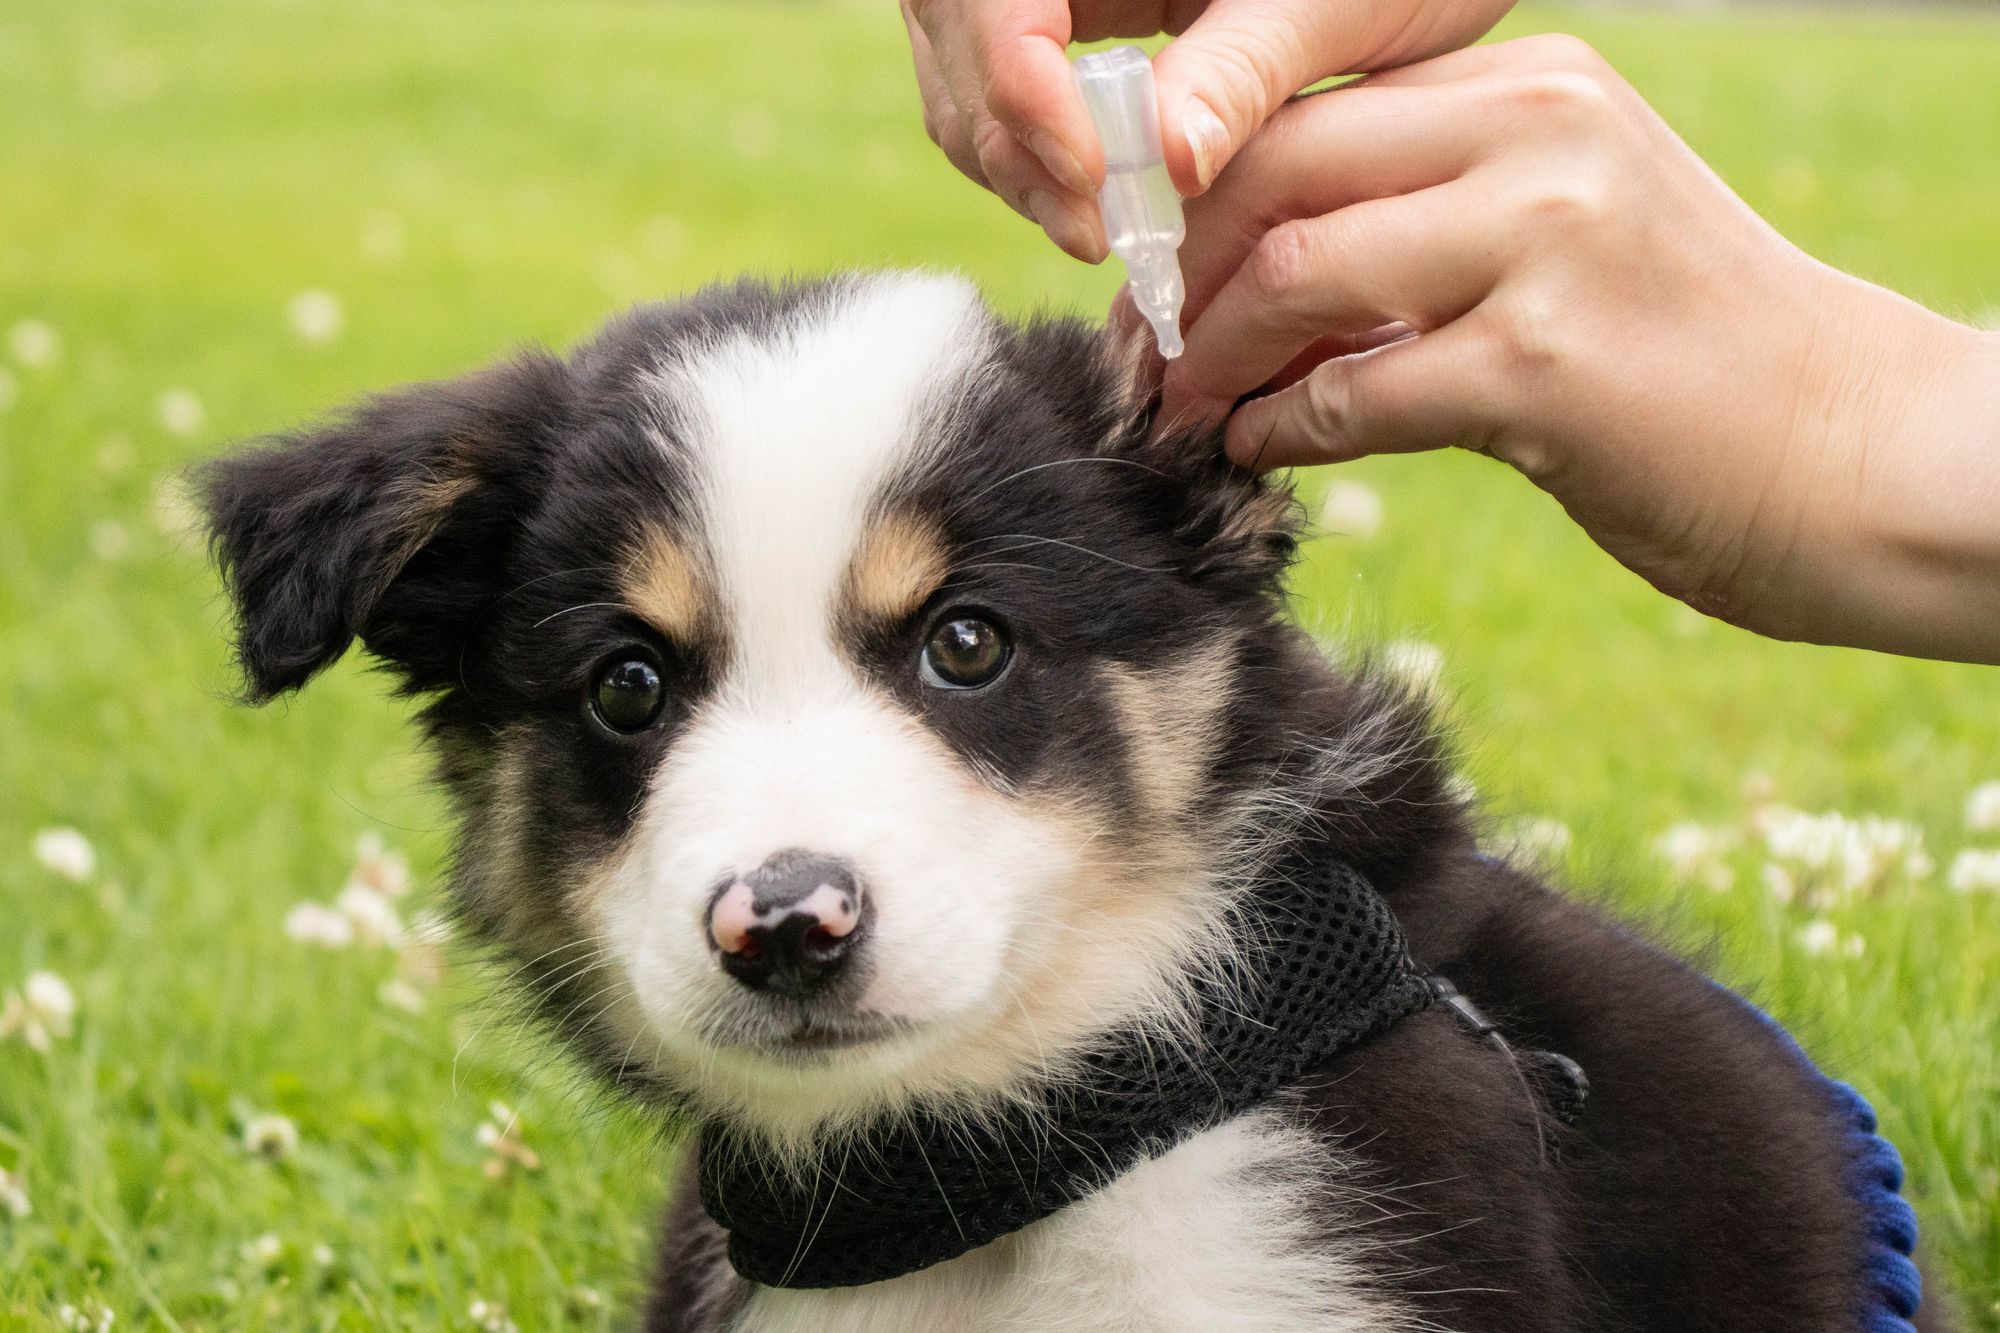 Home Remedies For Ear Mites in Dogs : https://blog.tryfi.com/